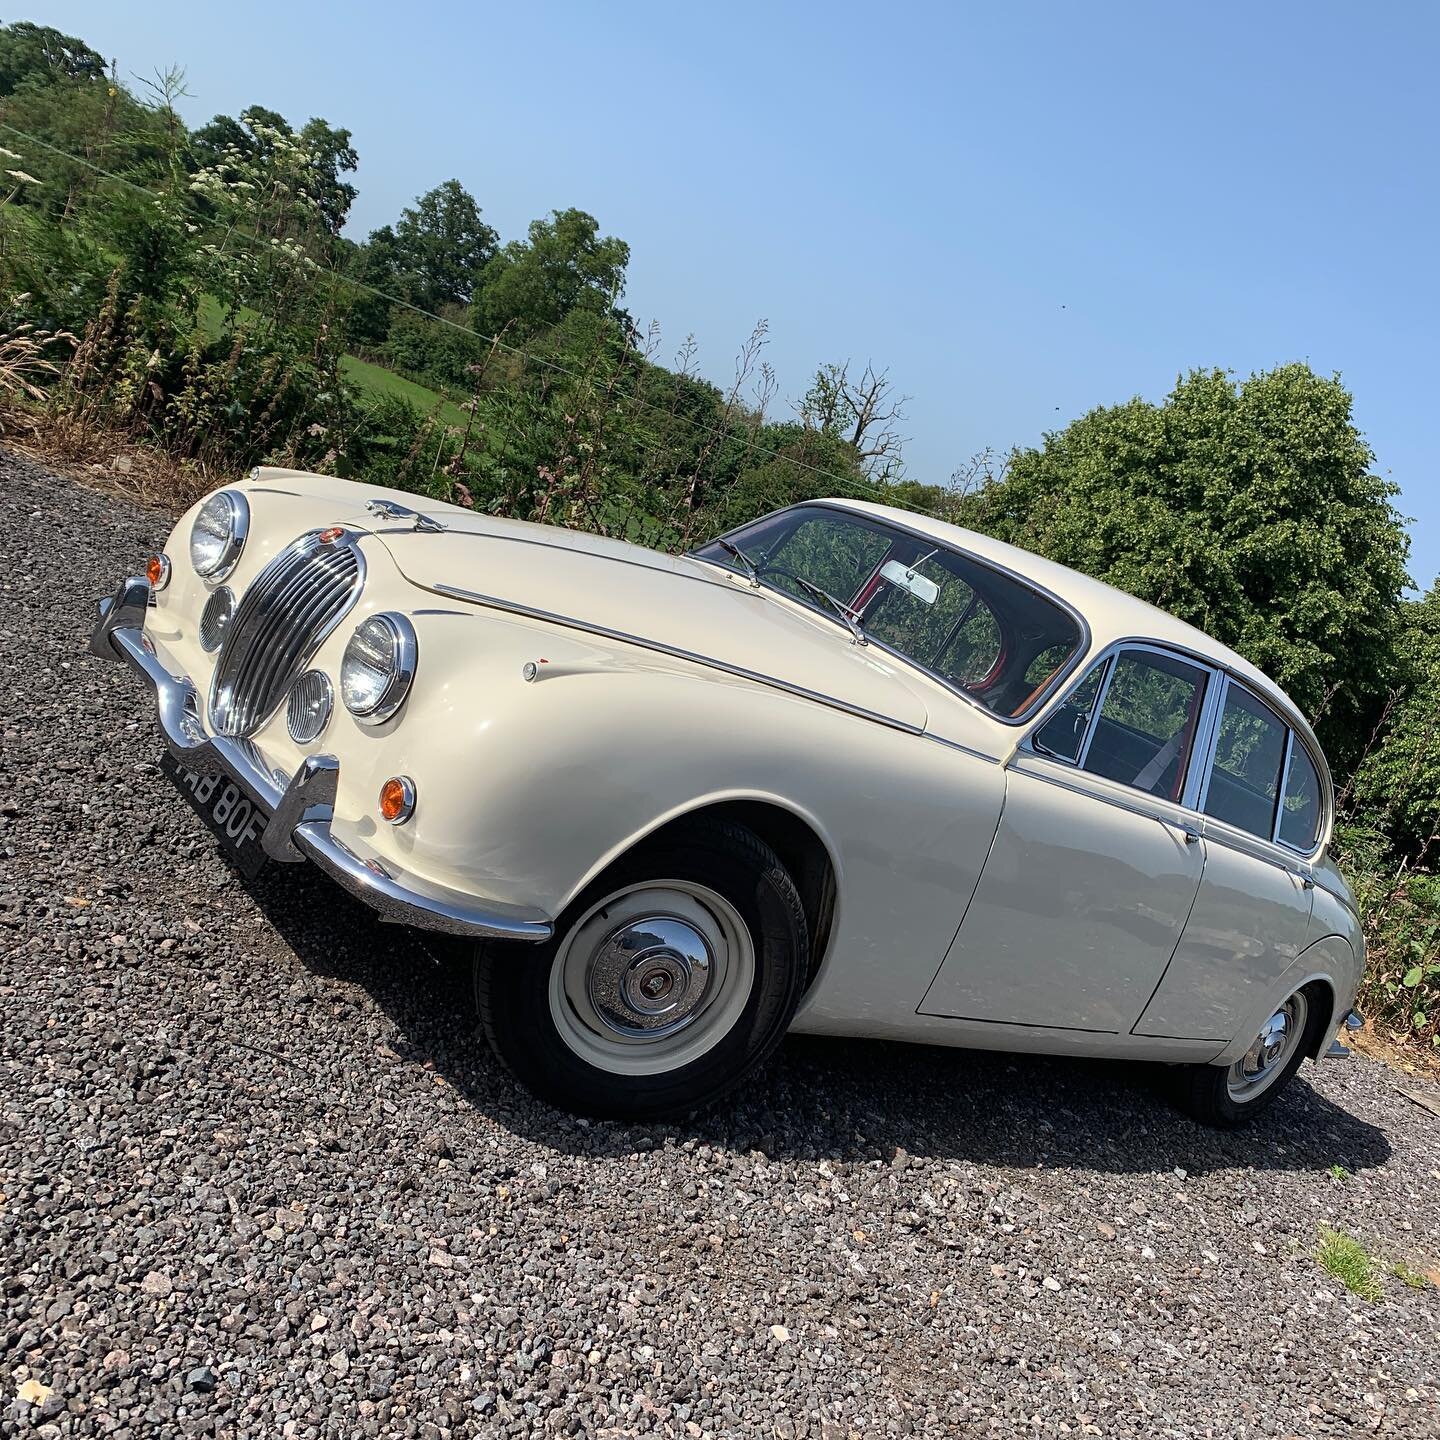 After a weekend in the sun, this lovely freshly restored Mk2 Jaguar is safely back in our secure storage facility. #hvsuk #classiccarstorage #carstorageuk #mk2jaguar #jaguar #jaguarclassic #htowndubandclassicclub #getoutanddrive #classiccarsofinstagr